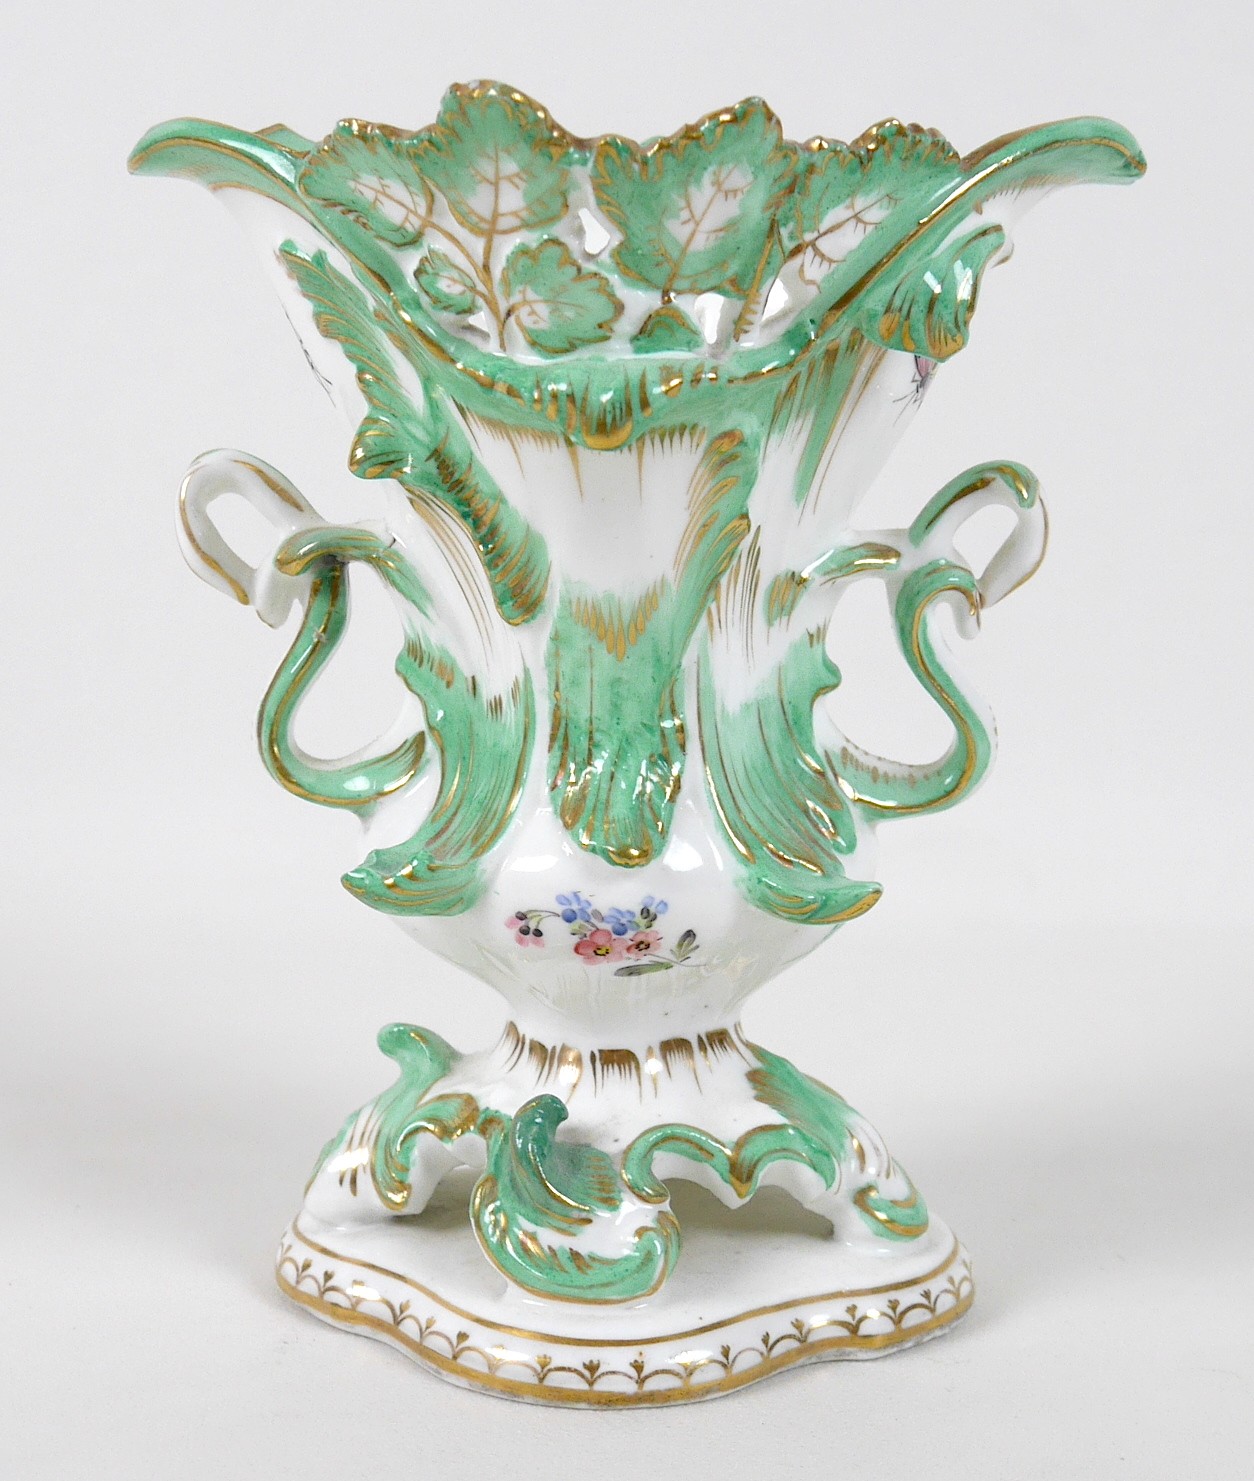 A mid 19th century porcelain Minton vase, decorated in Rococco taste with green and gilt scrolls and - Image 2 of 5